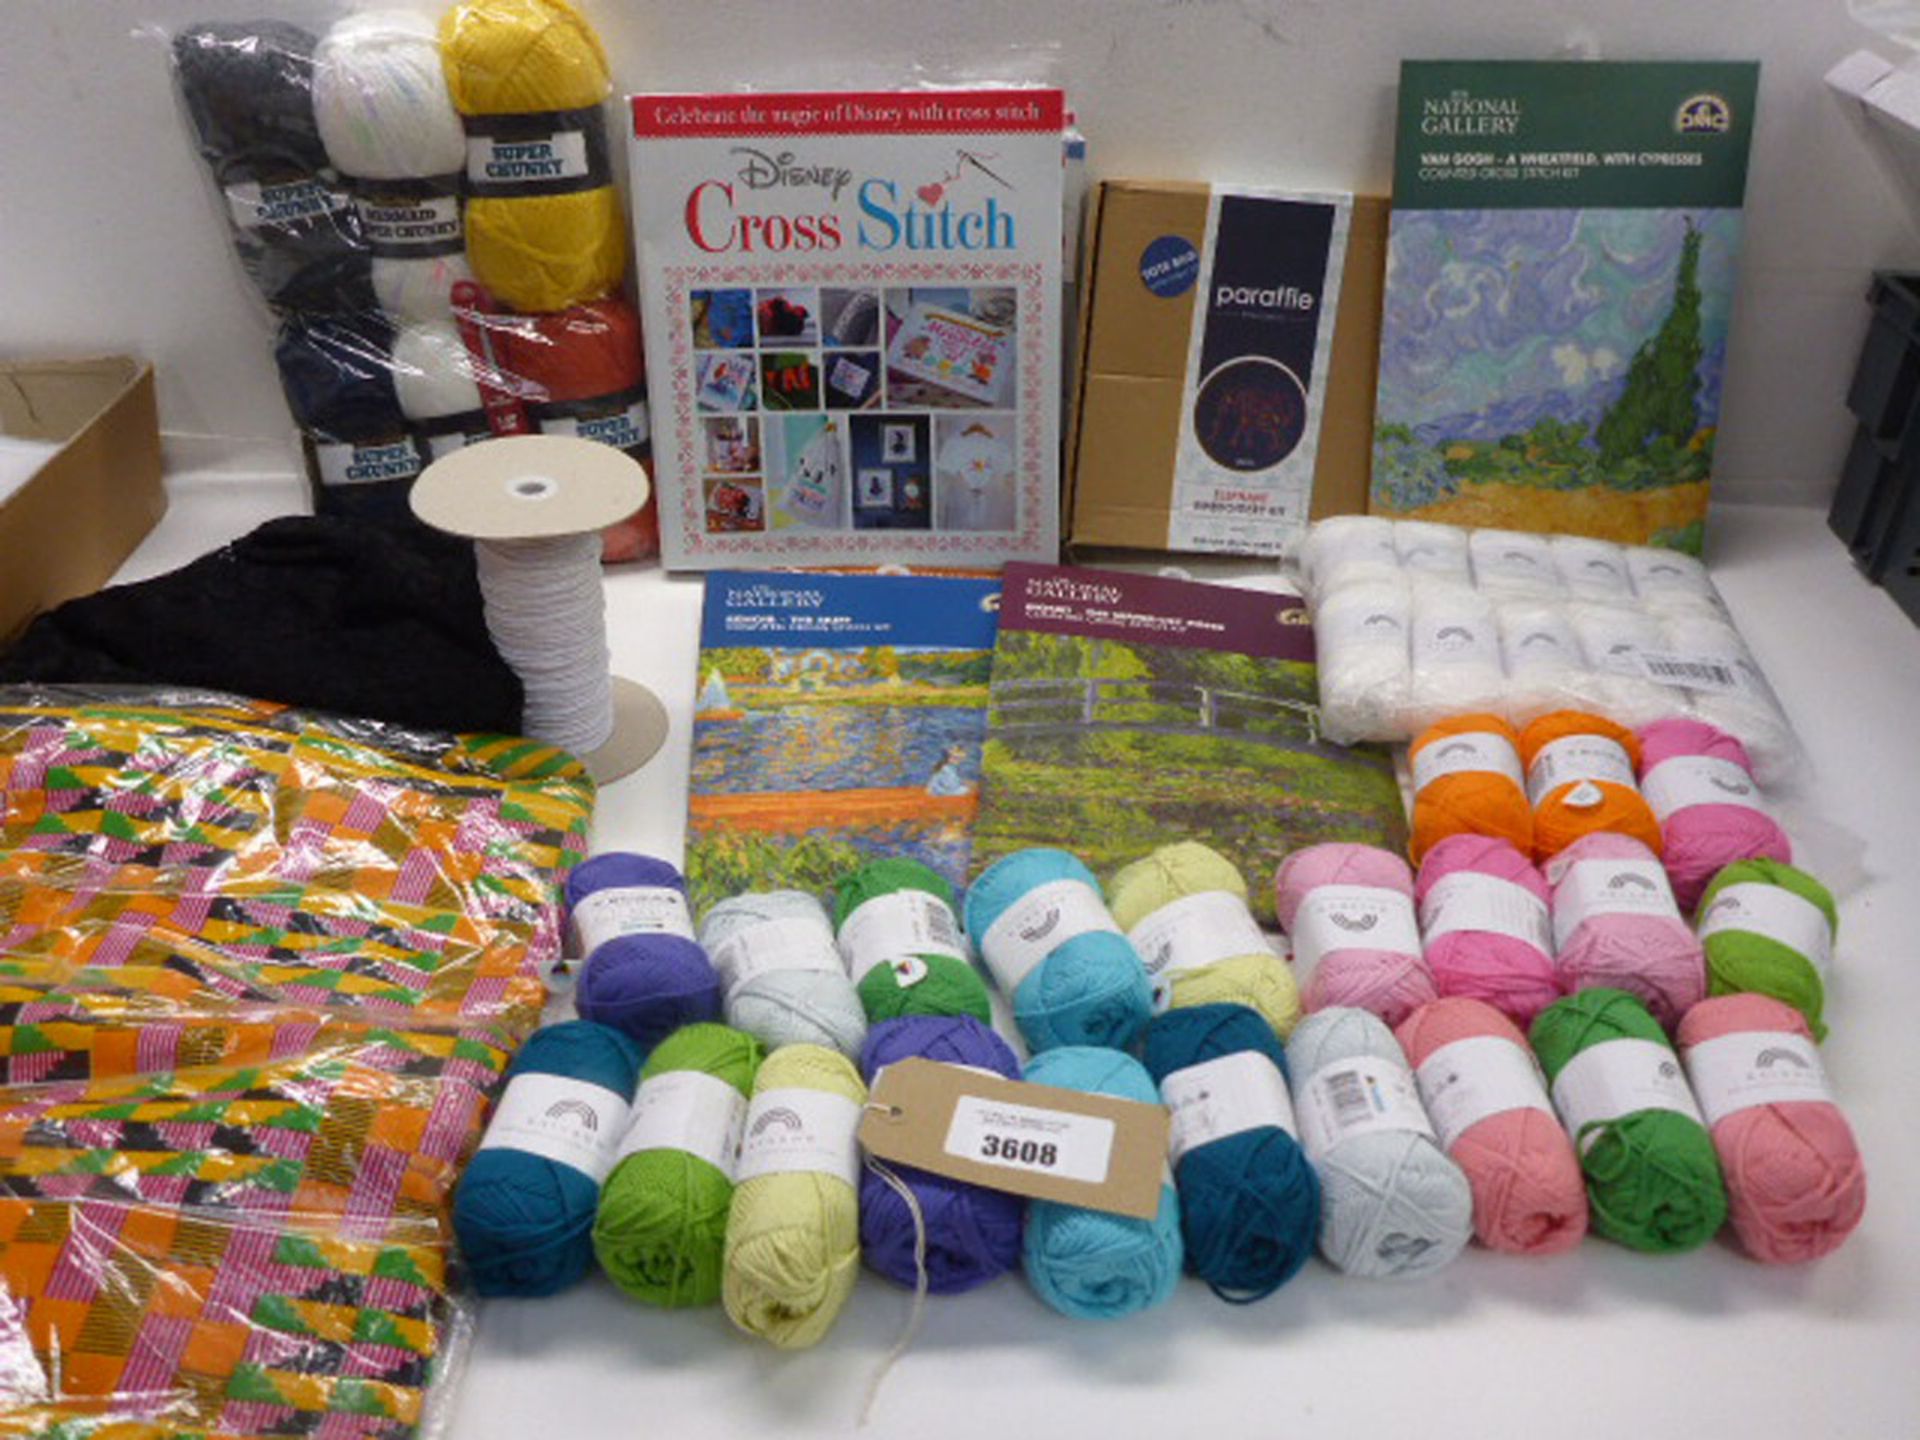 Selection of Super Chunky and natural cotton wool, National Gallery Cross Stitch kits, Disney